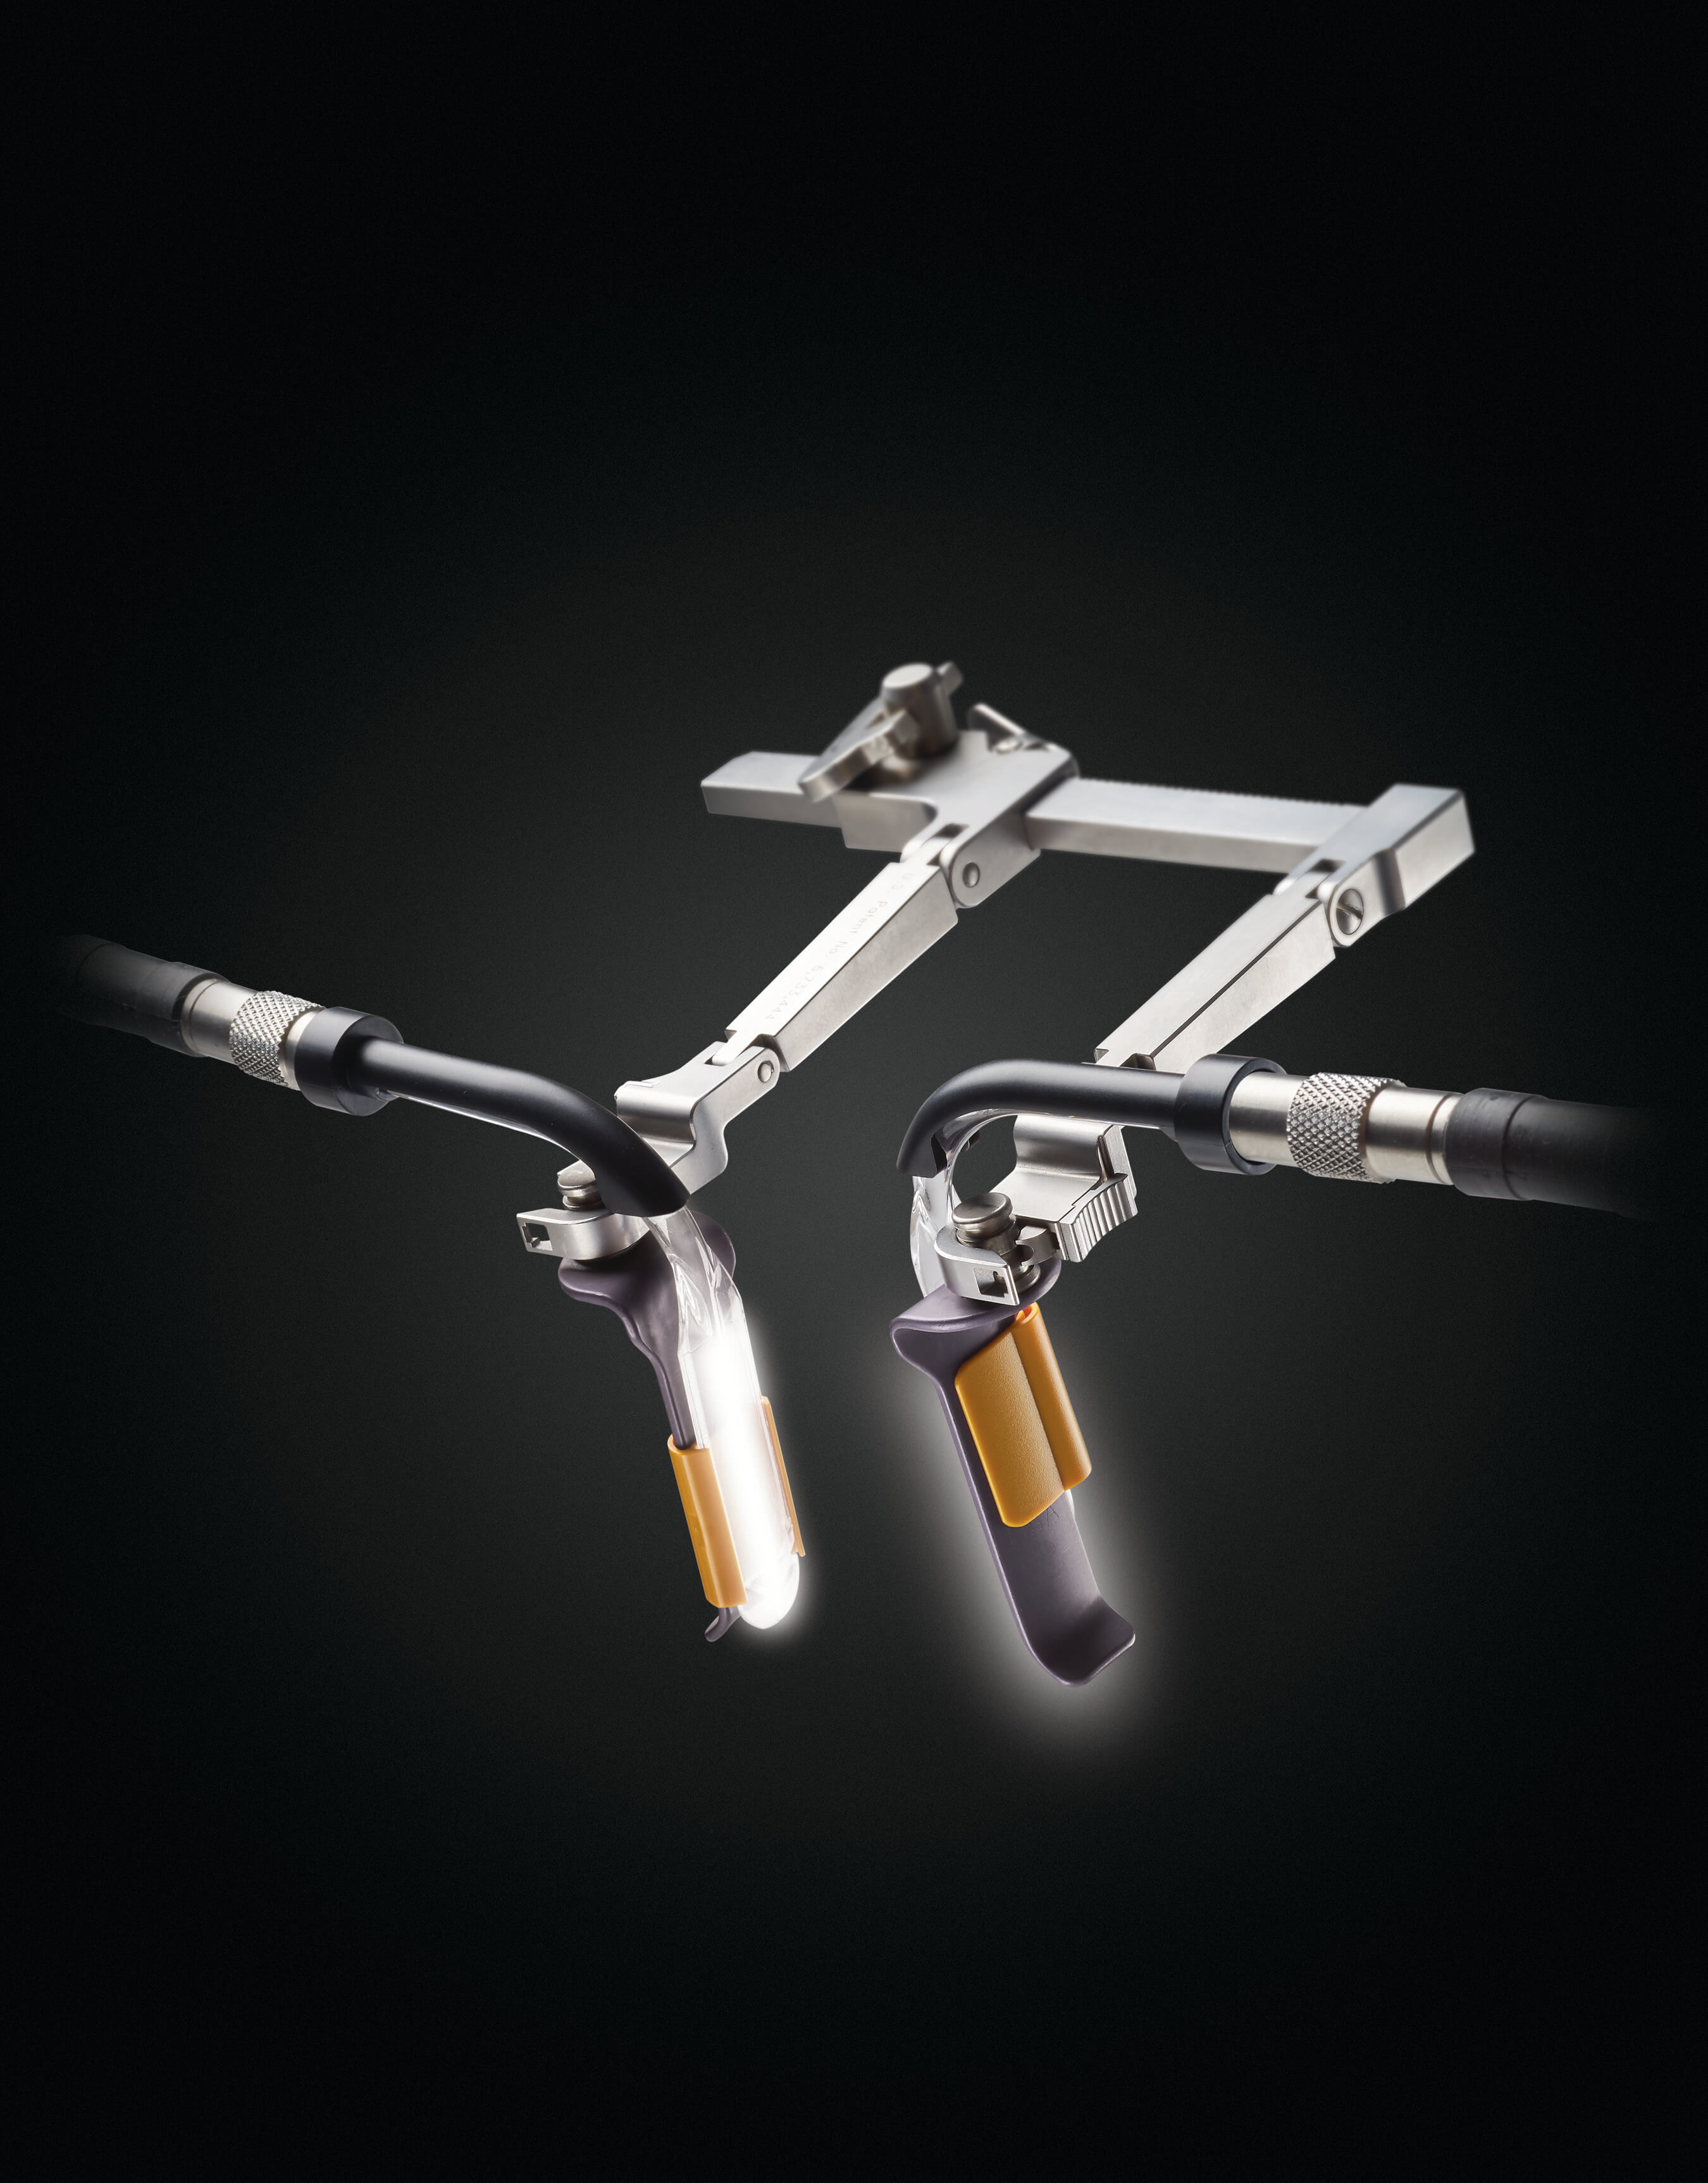 LiteClip- The Gold Standard in Surgical Site Illumination